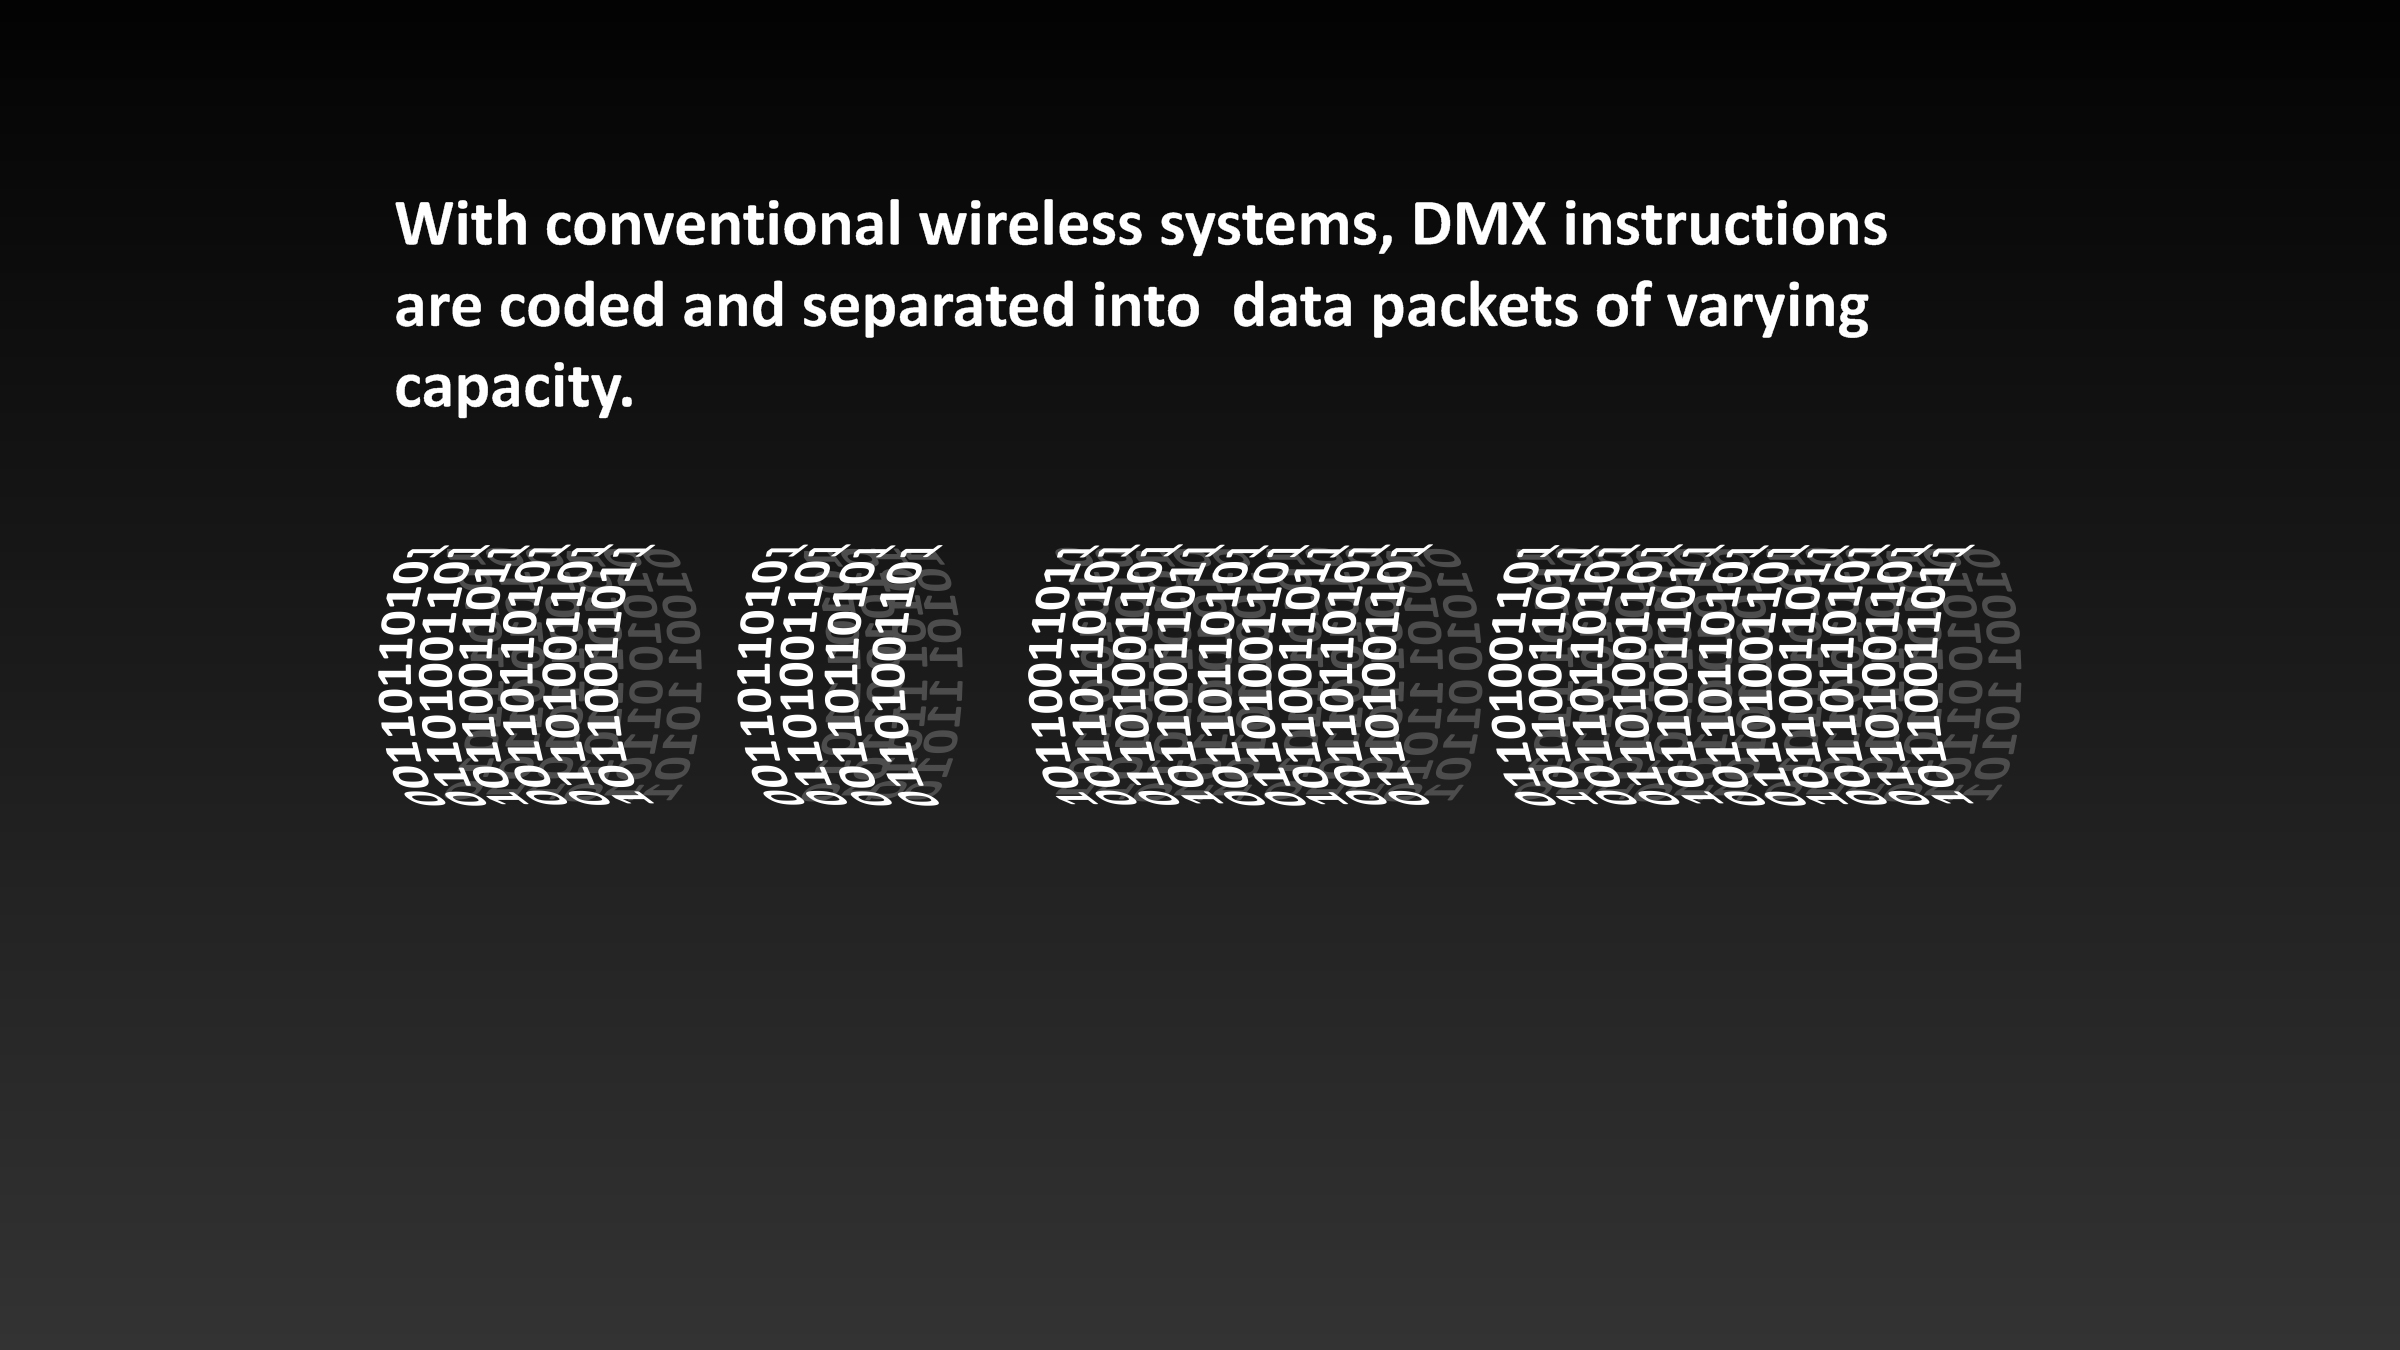 Multiverse 7 Illustration of DMX Instructions in Conventional Wireless DMX System